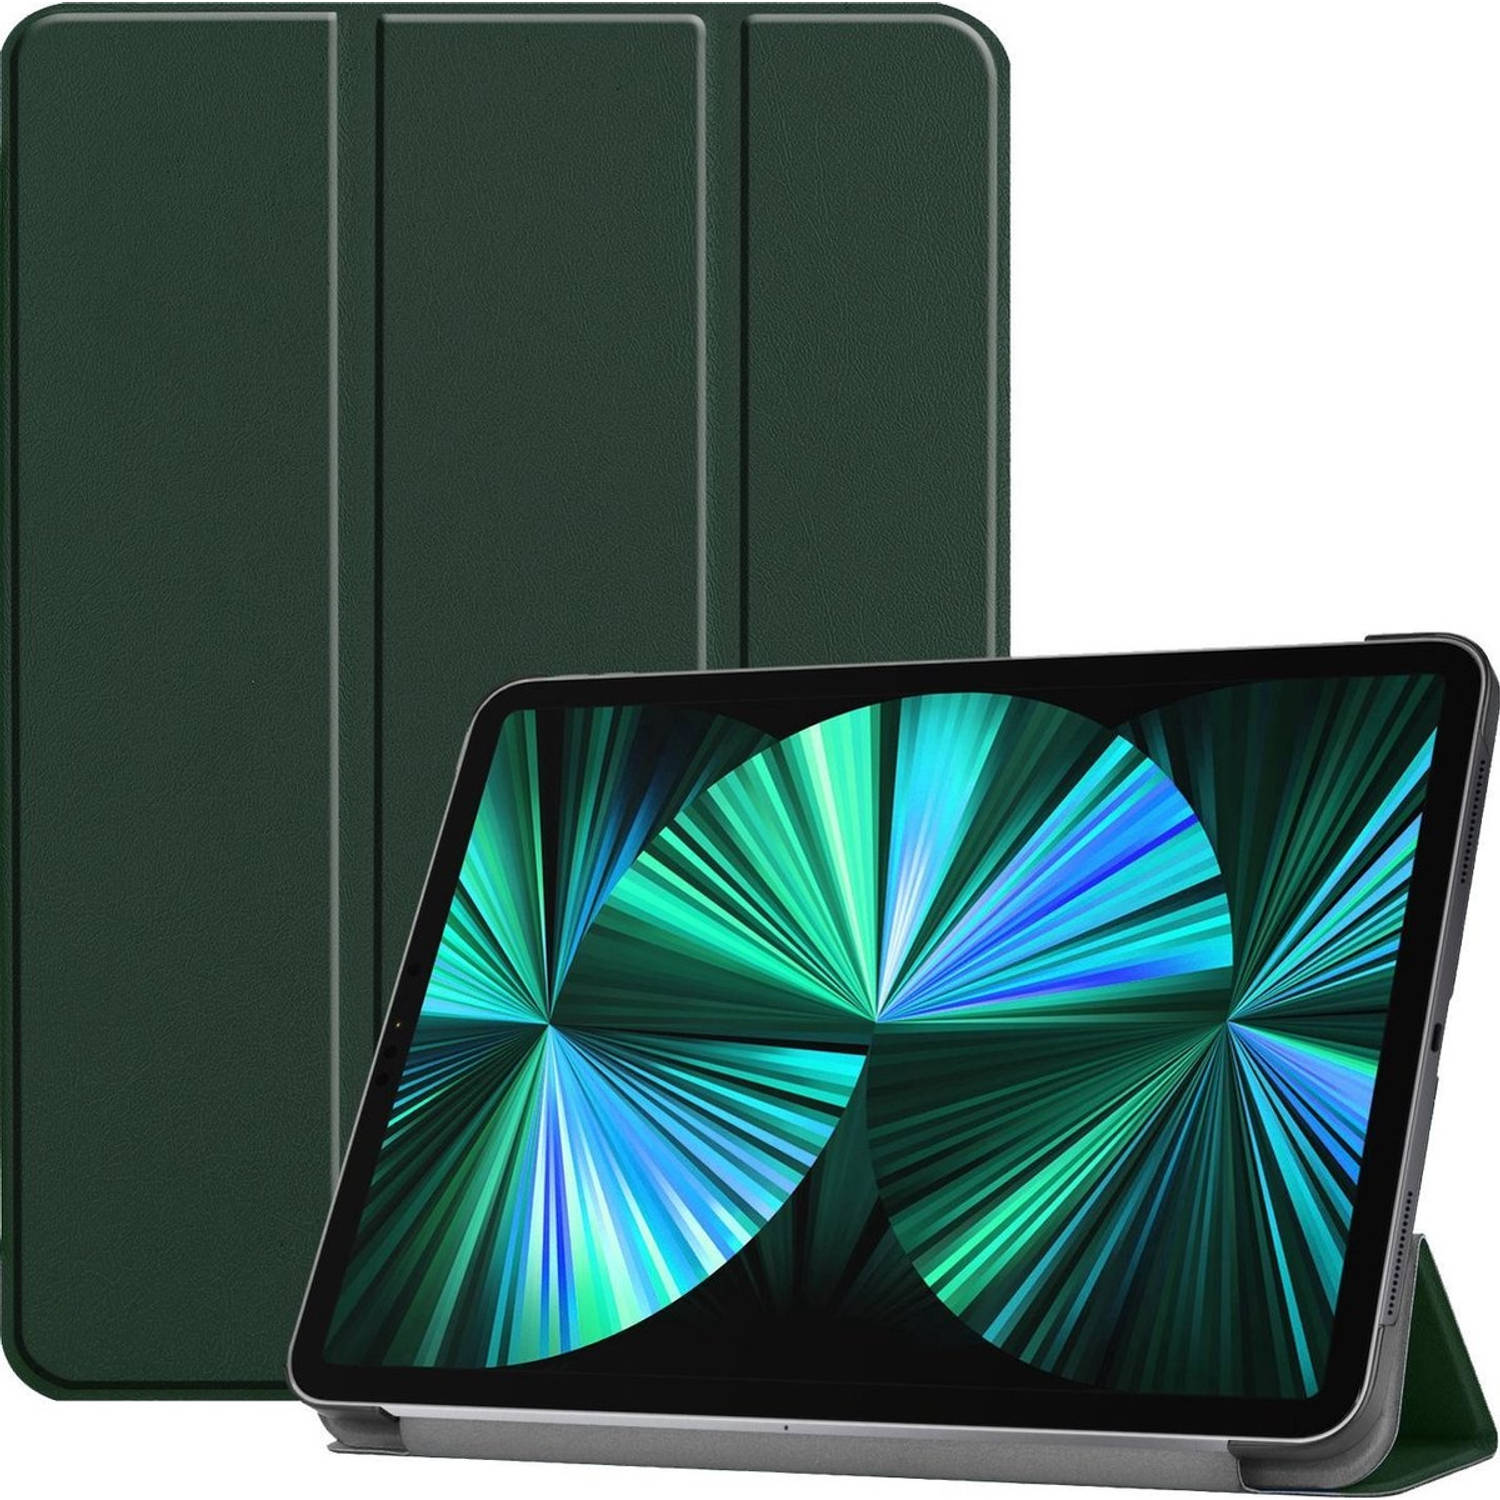 Basey Ipad Pro 2021 12,9 Inch Hoes Case Hoesje Donker Groen Hardcover Book Case Cover